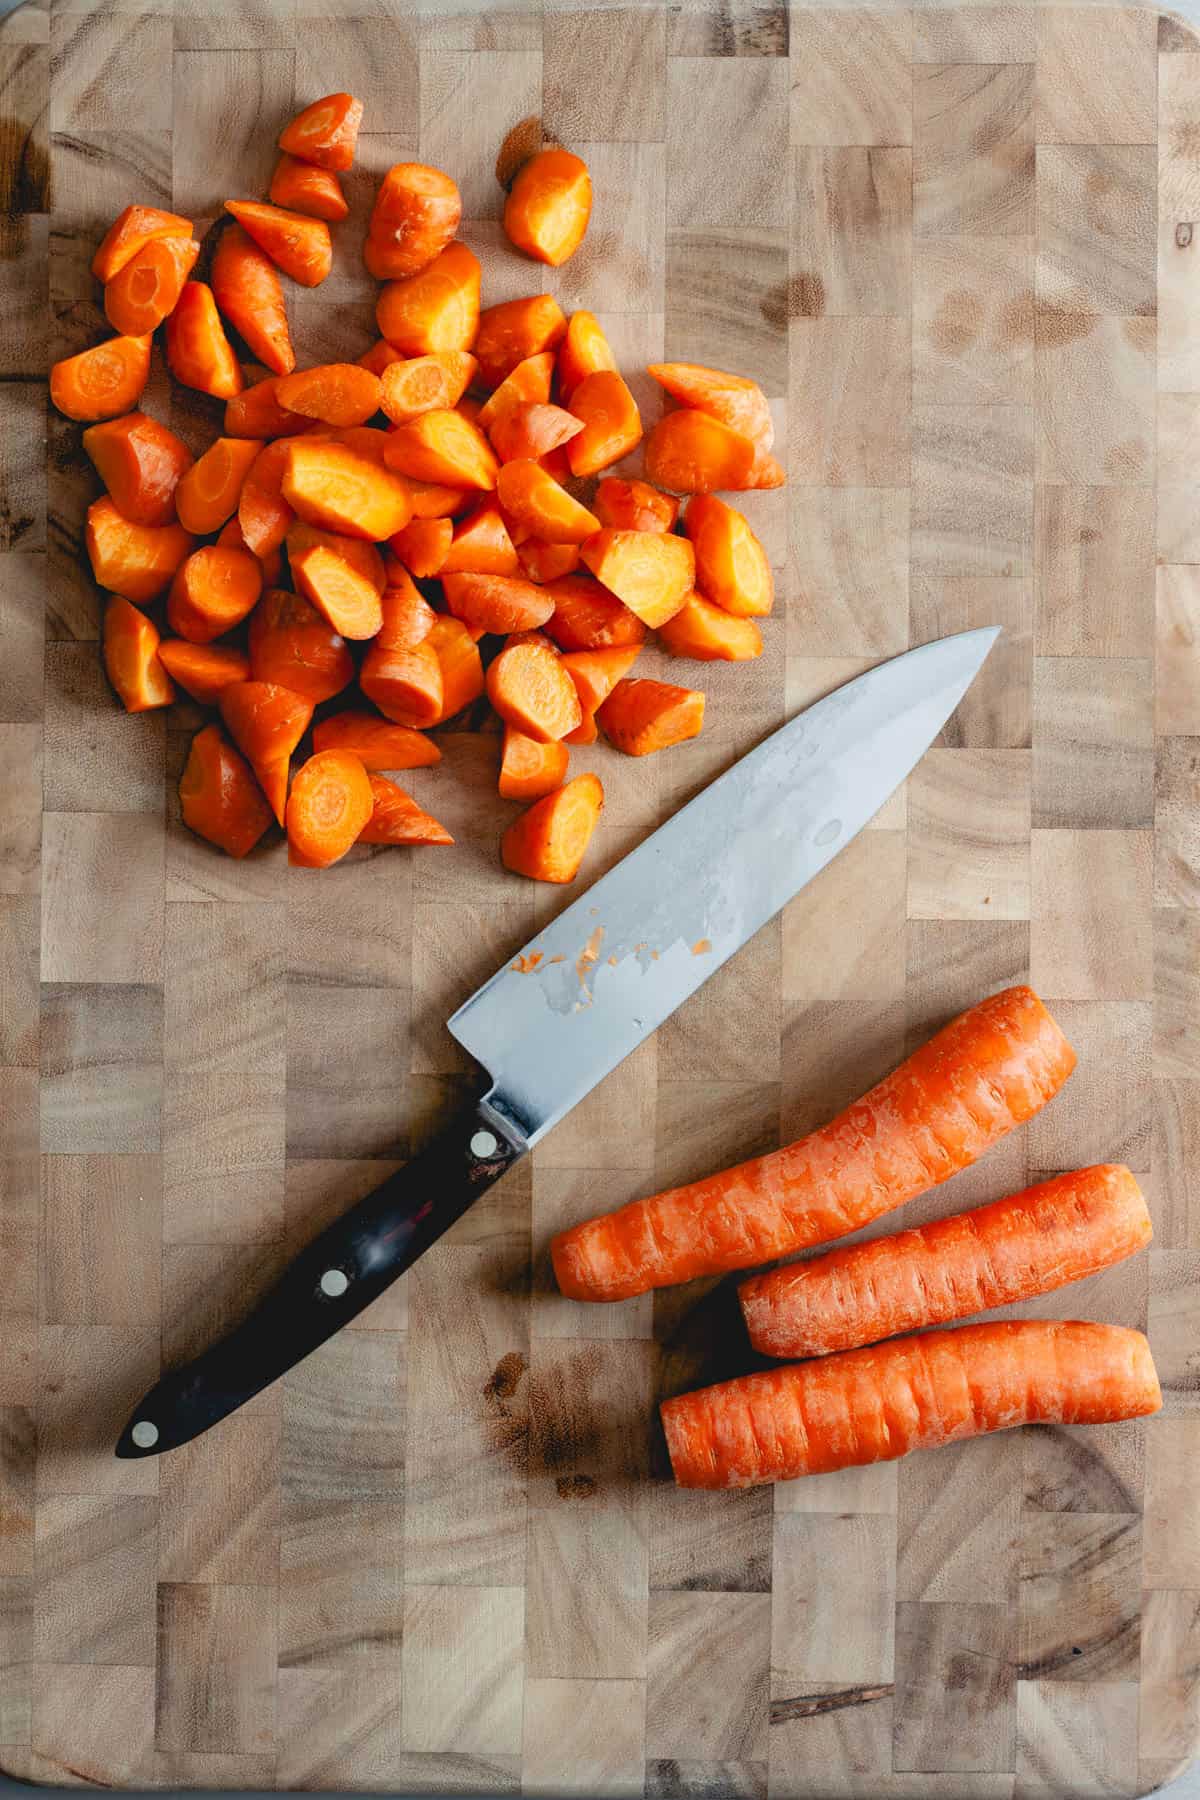 Carrots on a cutting board ready to get cut into oblong pieces.